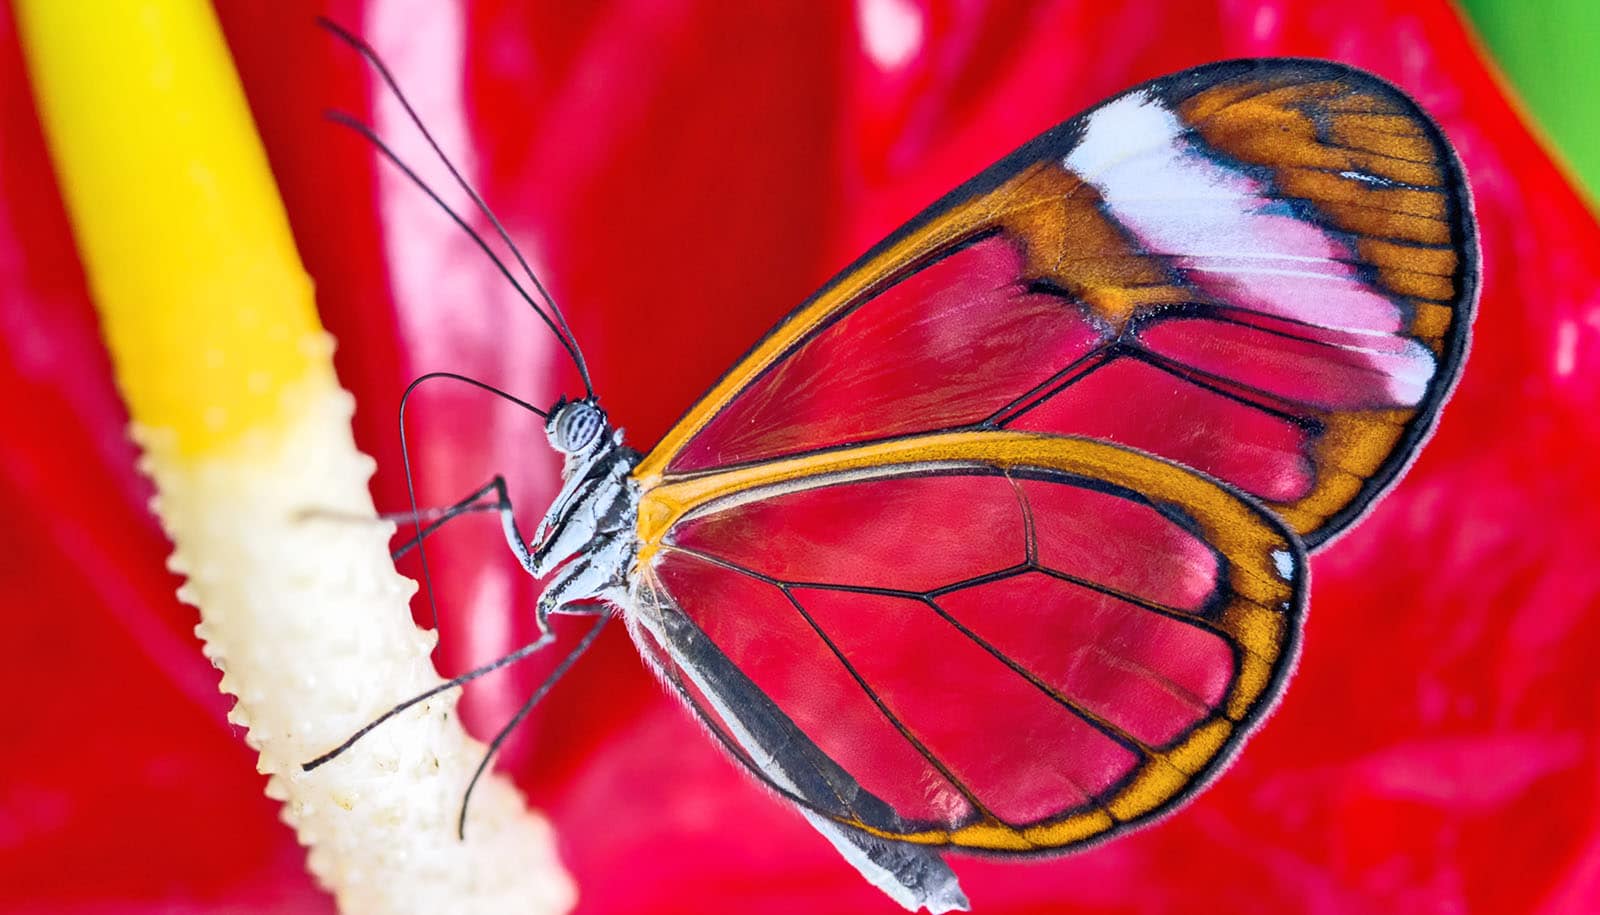 translucent butterfly on stamen of red flower